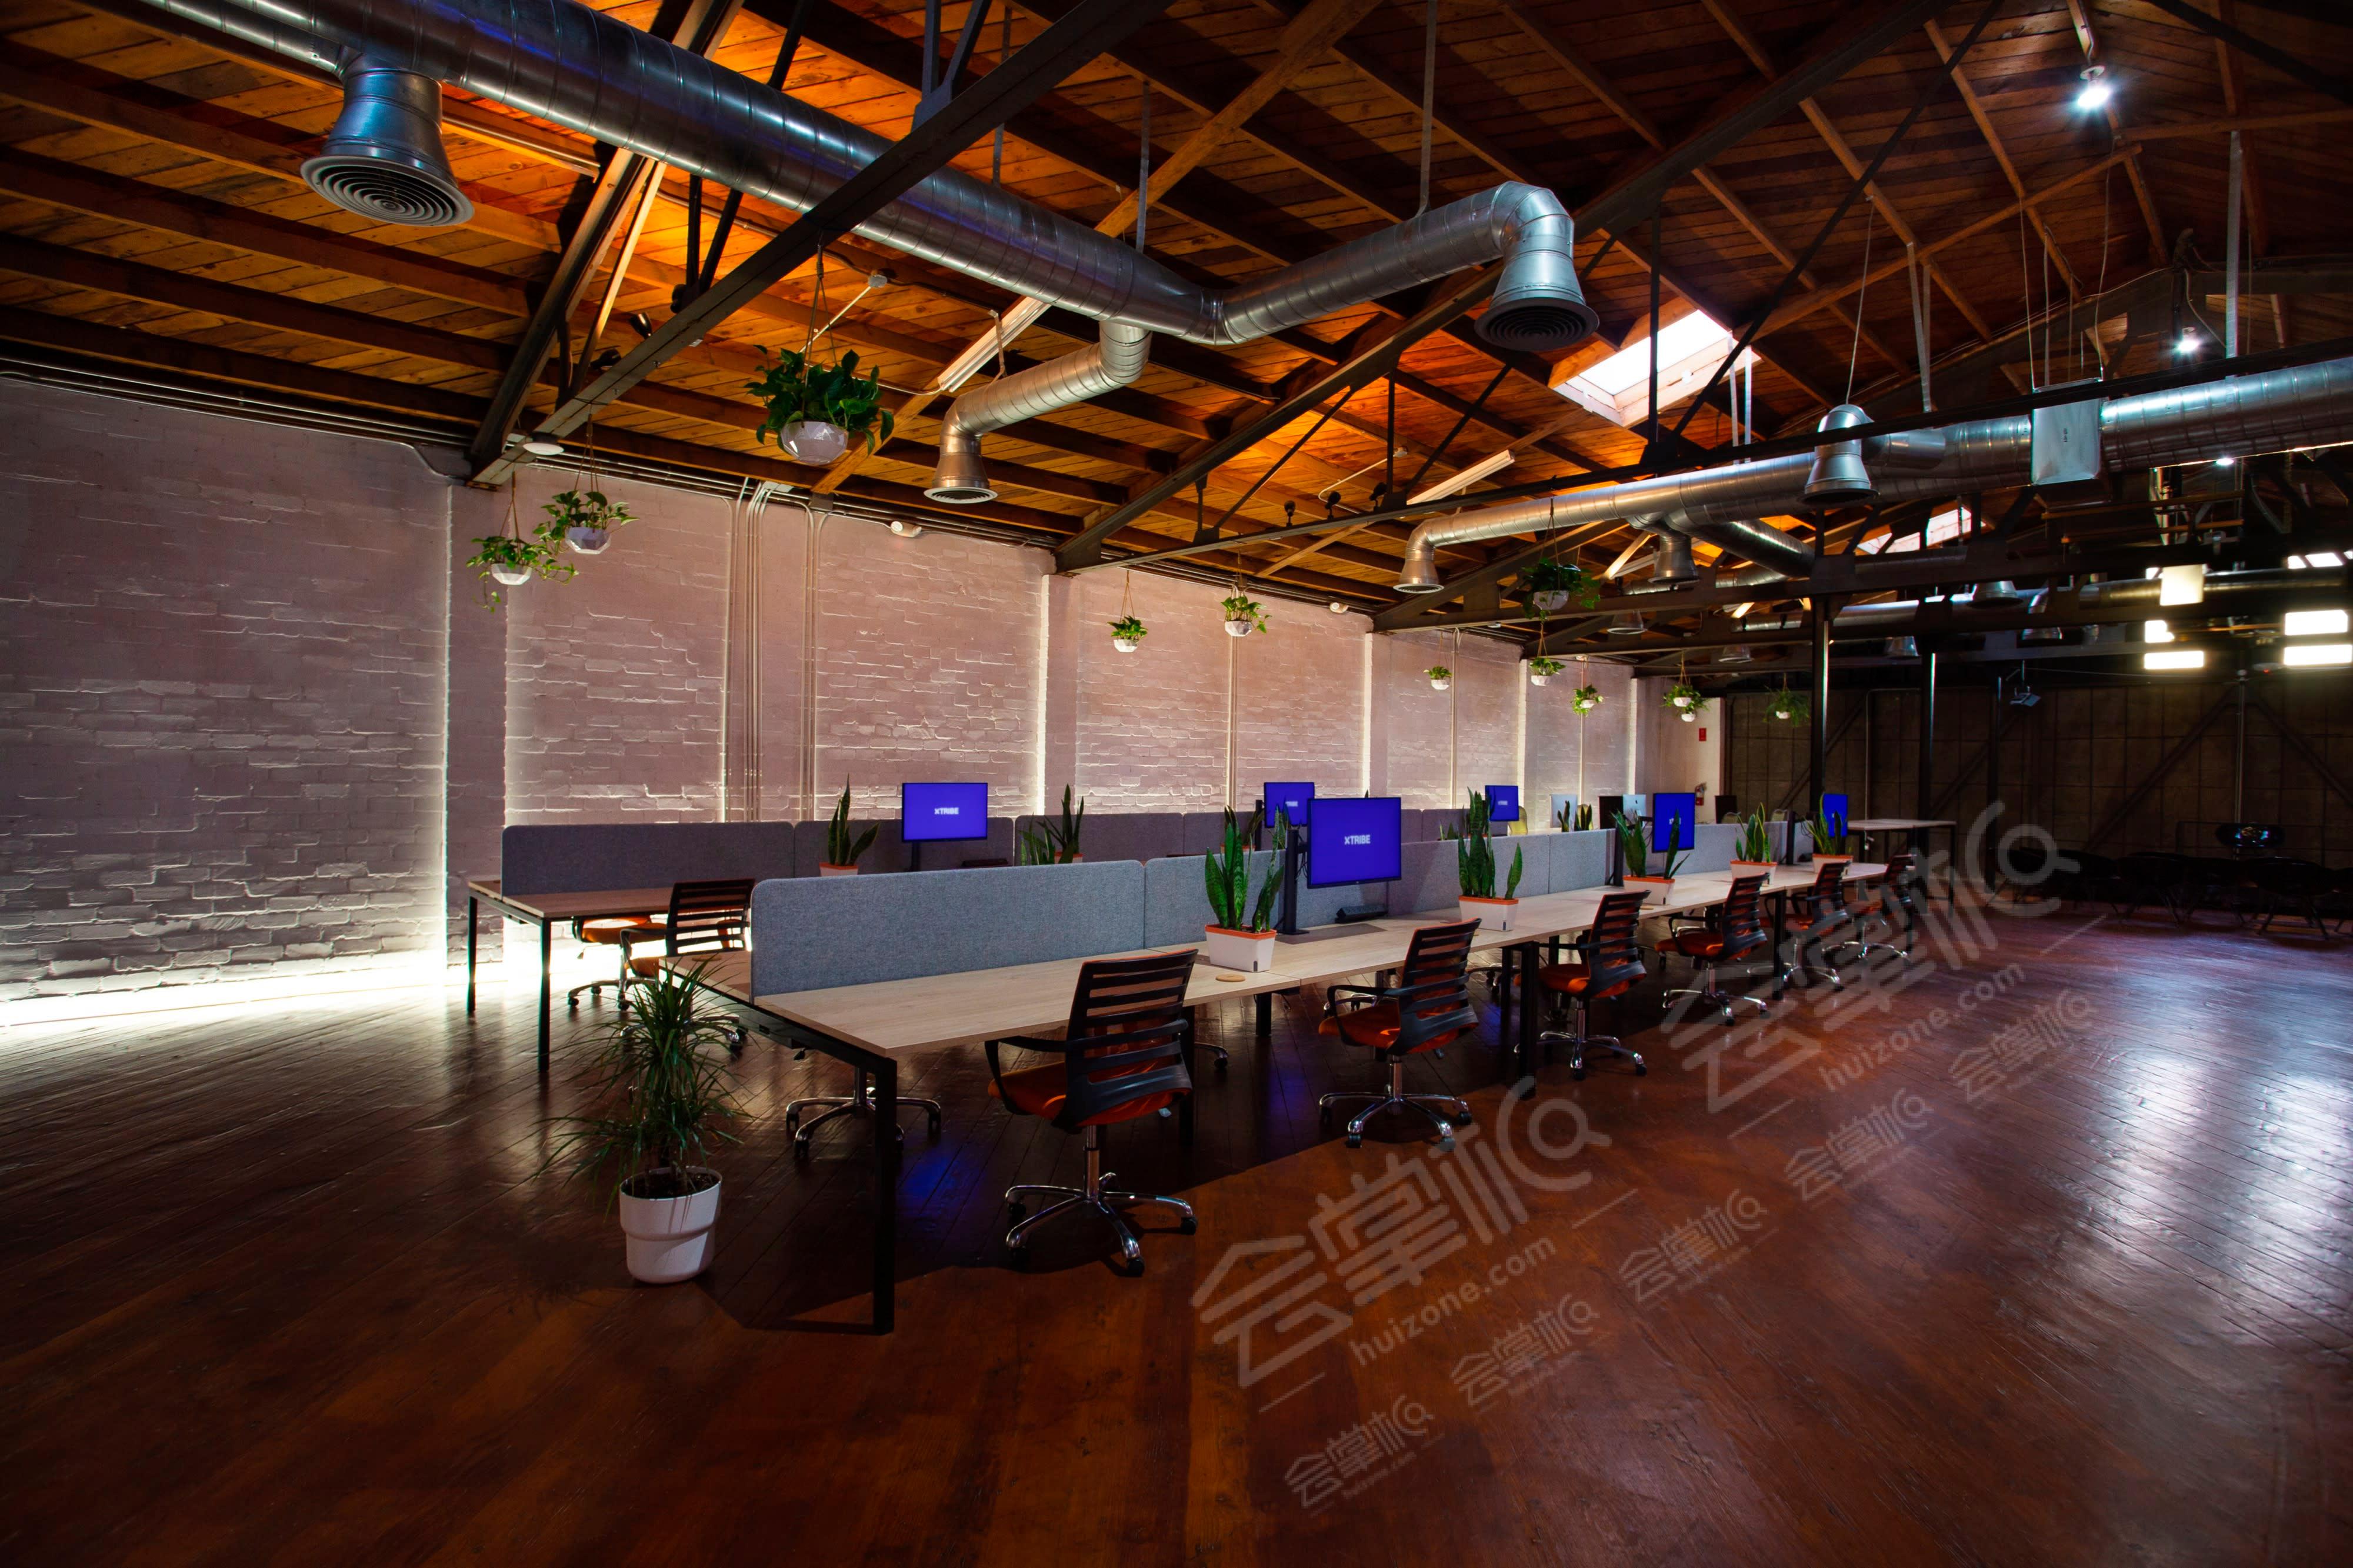 Private Coworking Space with 62 Desks, Event Stage, Kitchen and 3 Restrooms